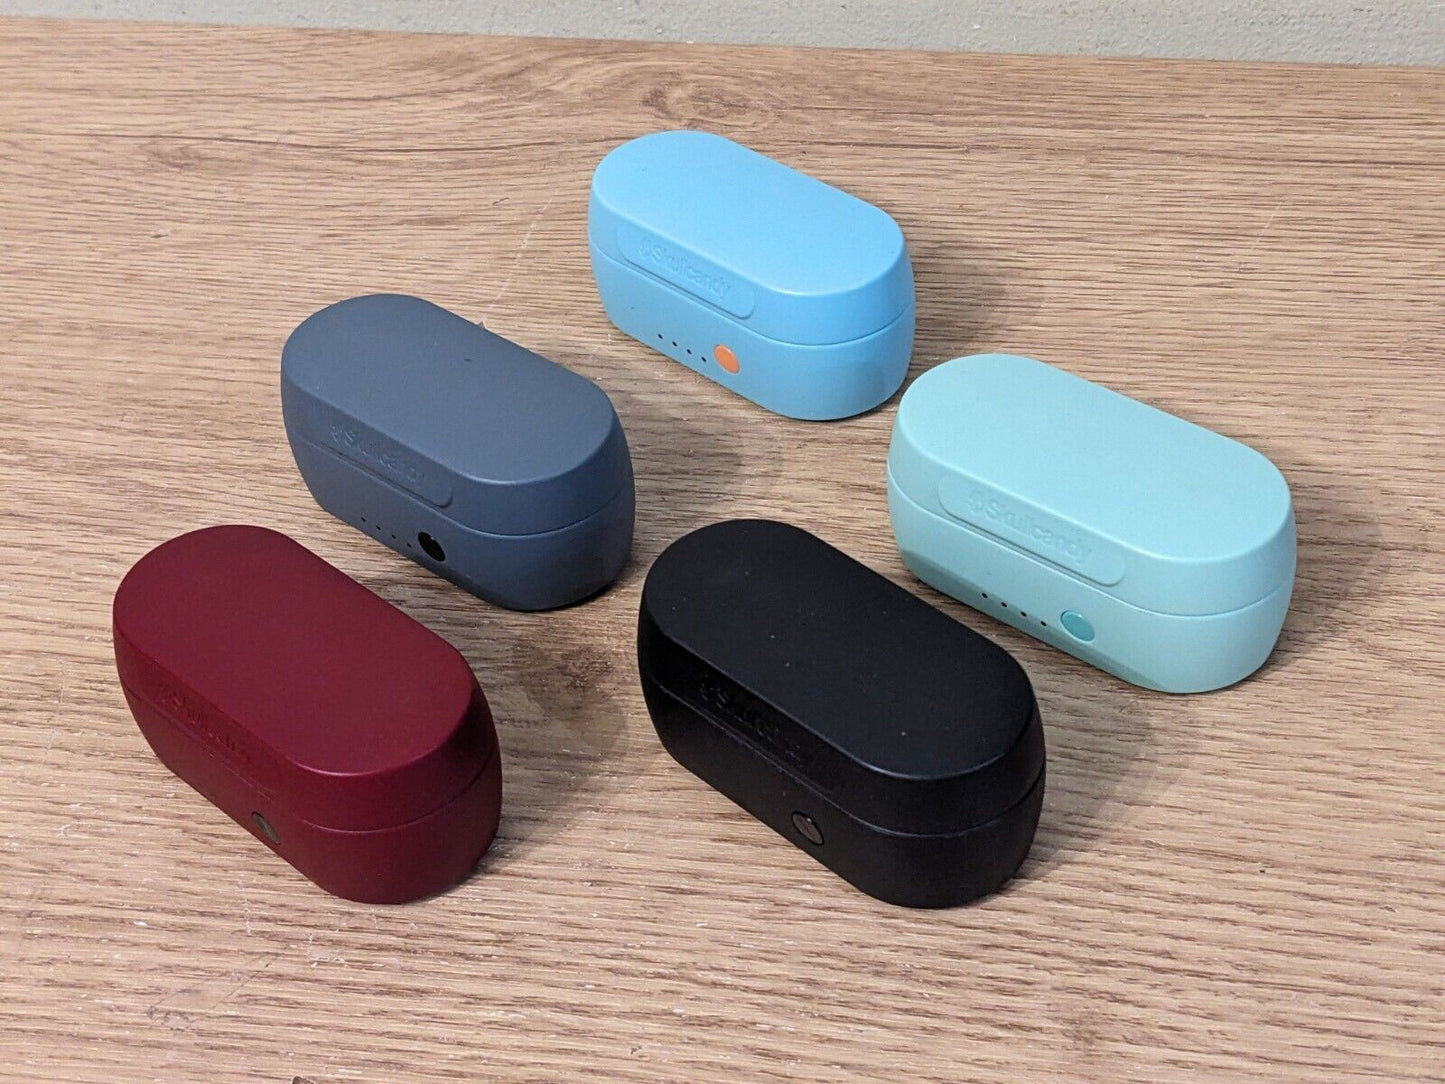 Skullcandy Sesh Evo replacement parts: charging case, left/right earbuds